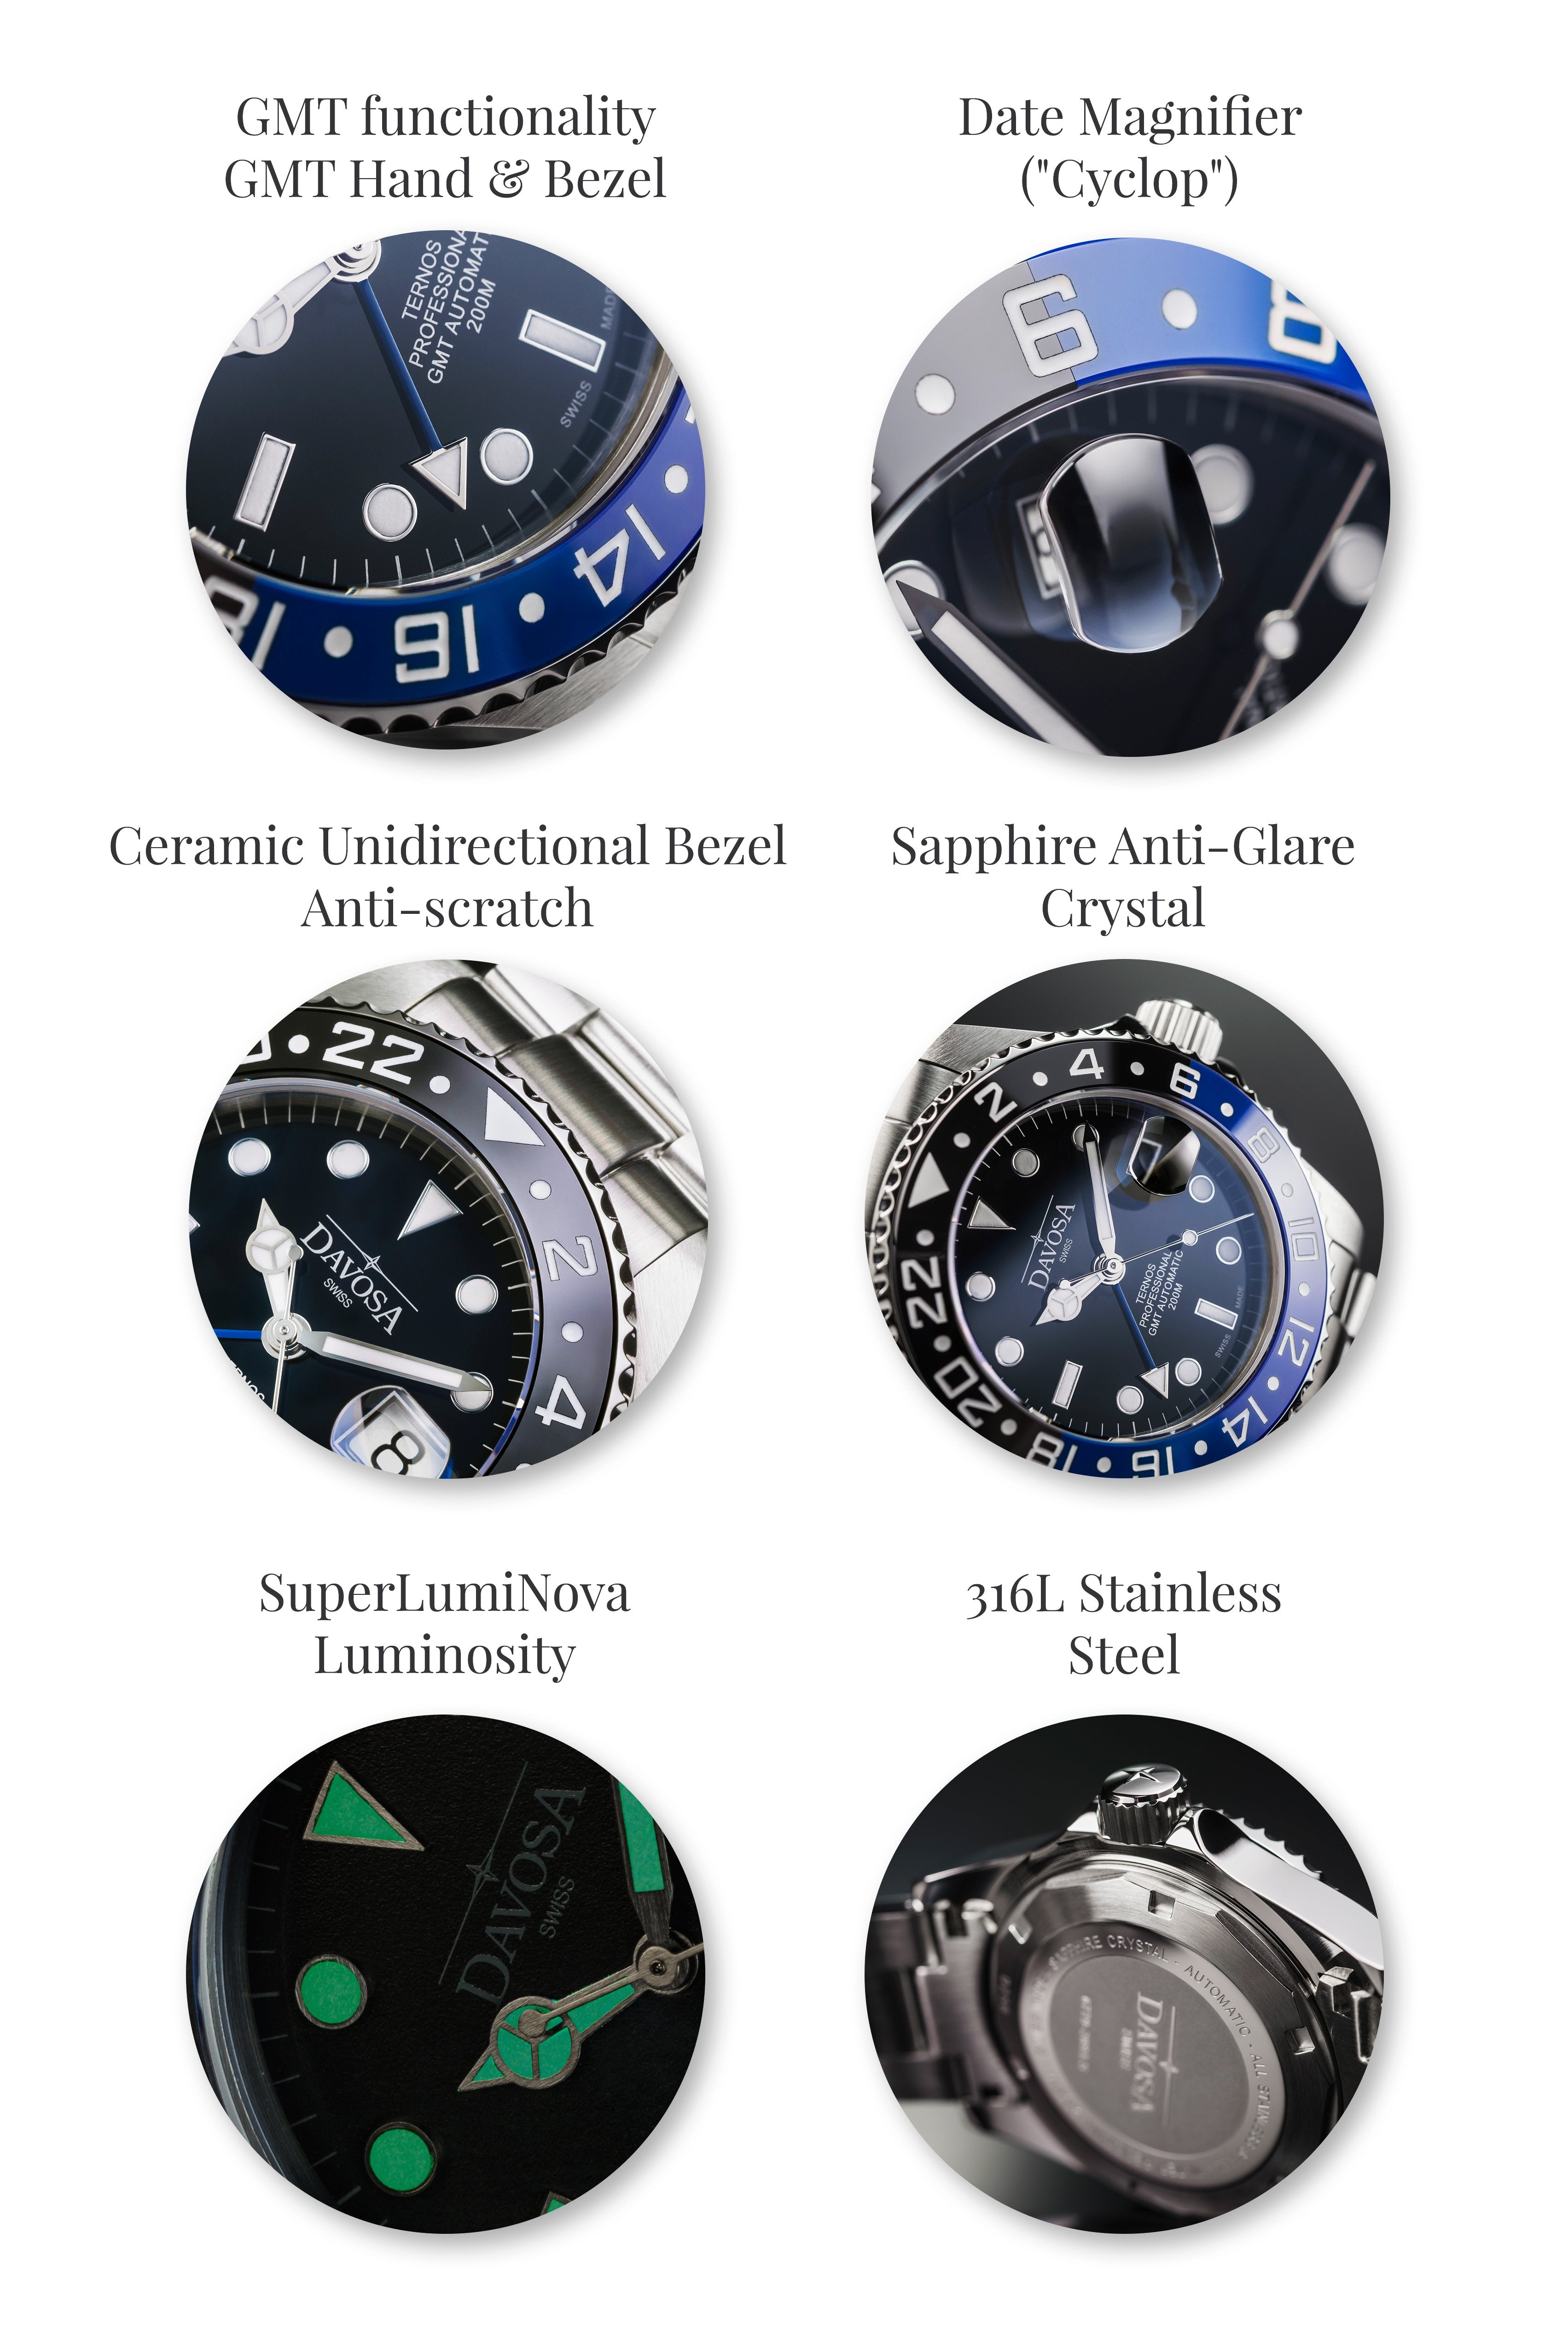 What Hand Do Men's Watches Go On?